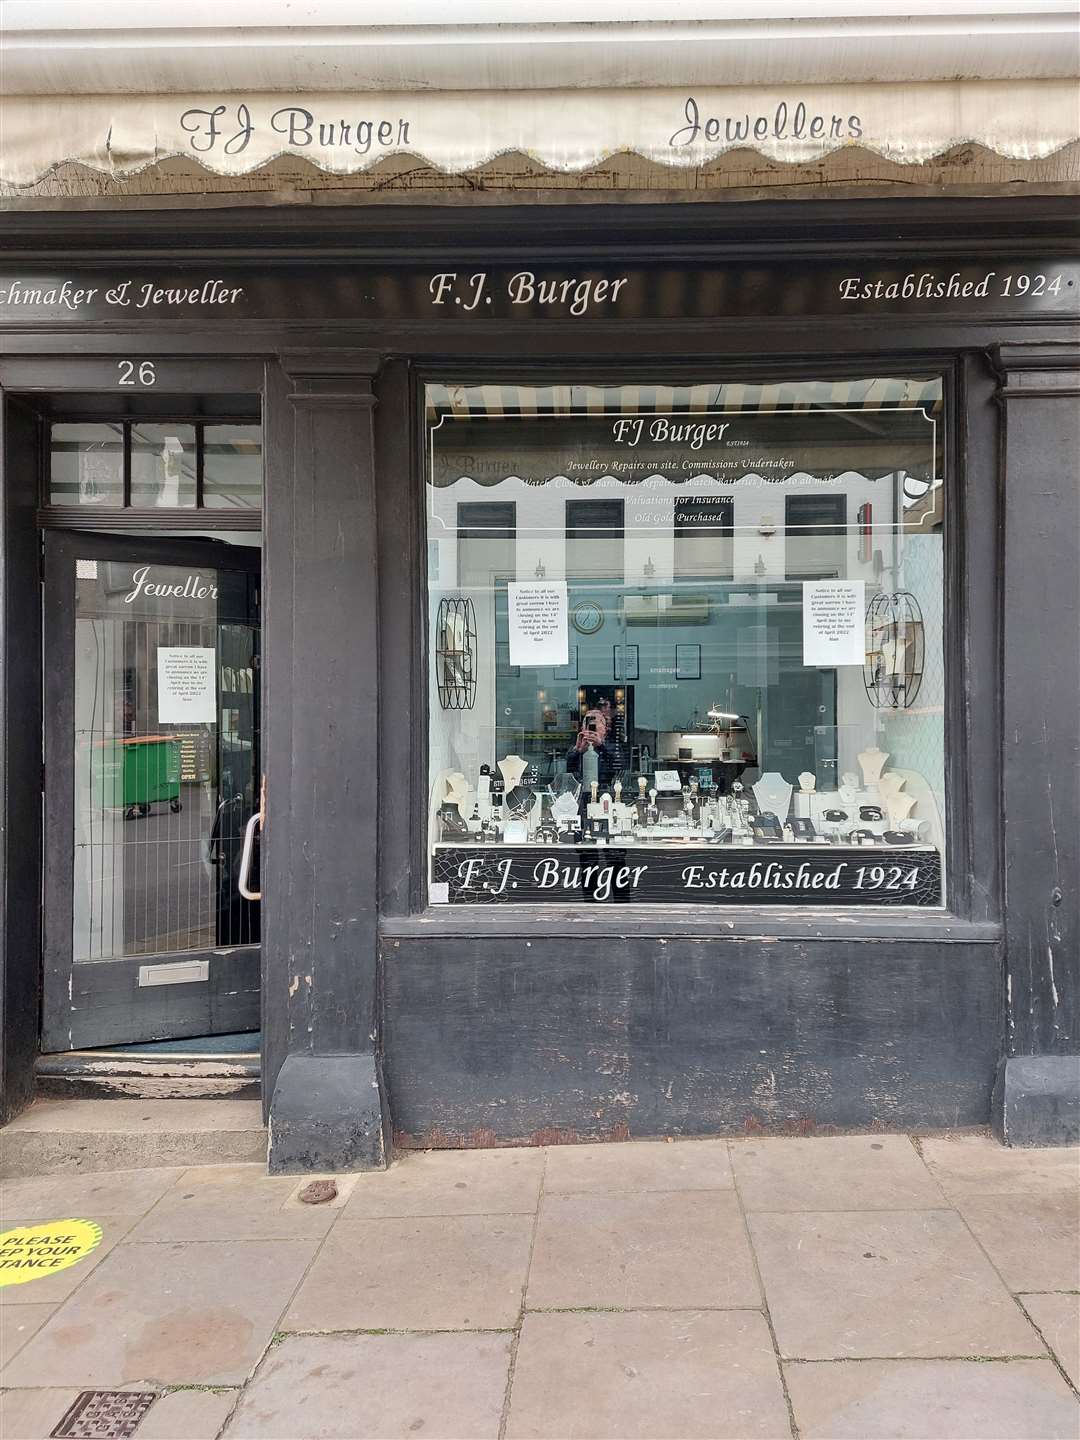 The small shop in Earl Street is closing down